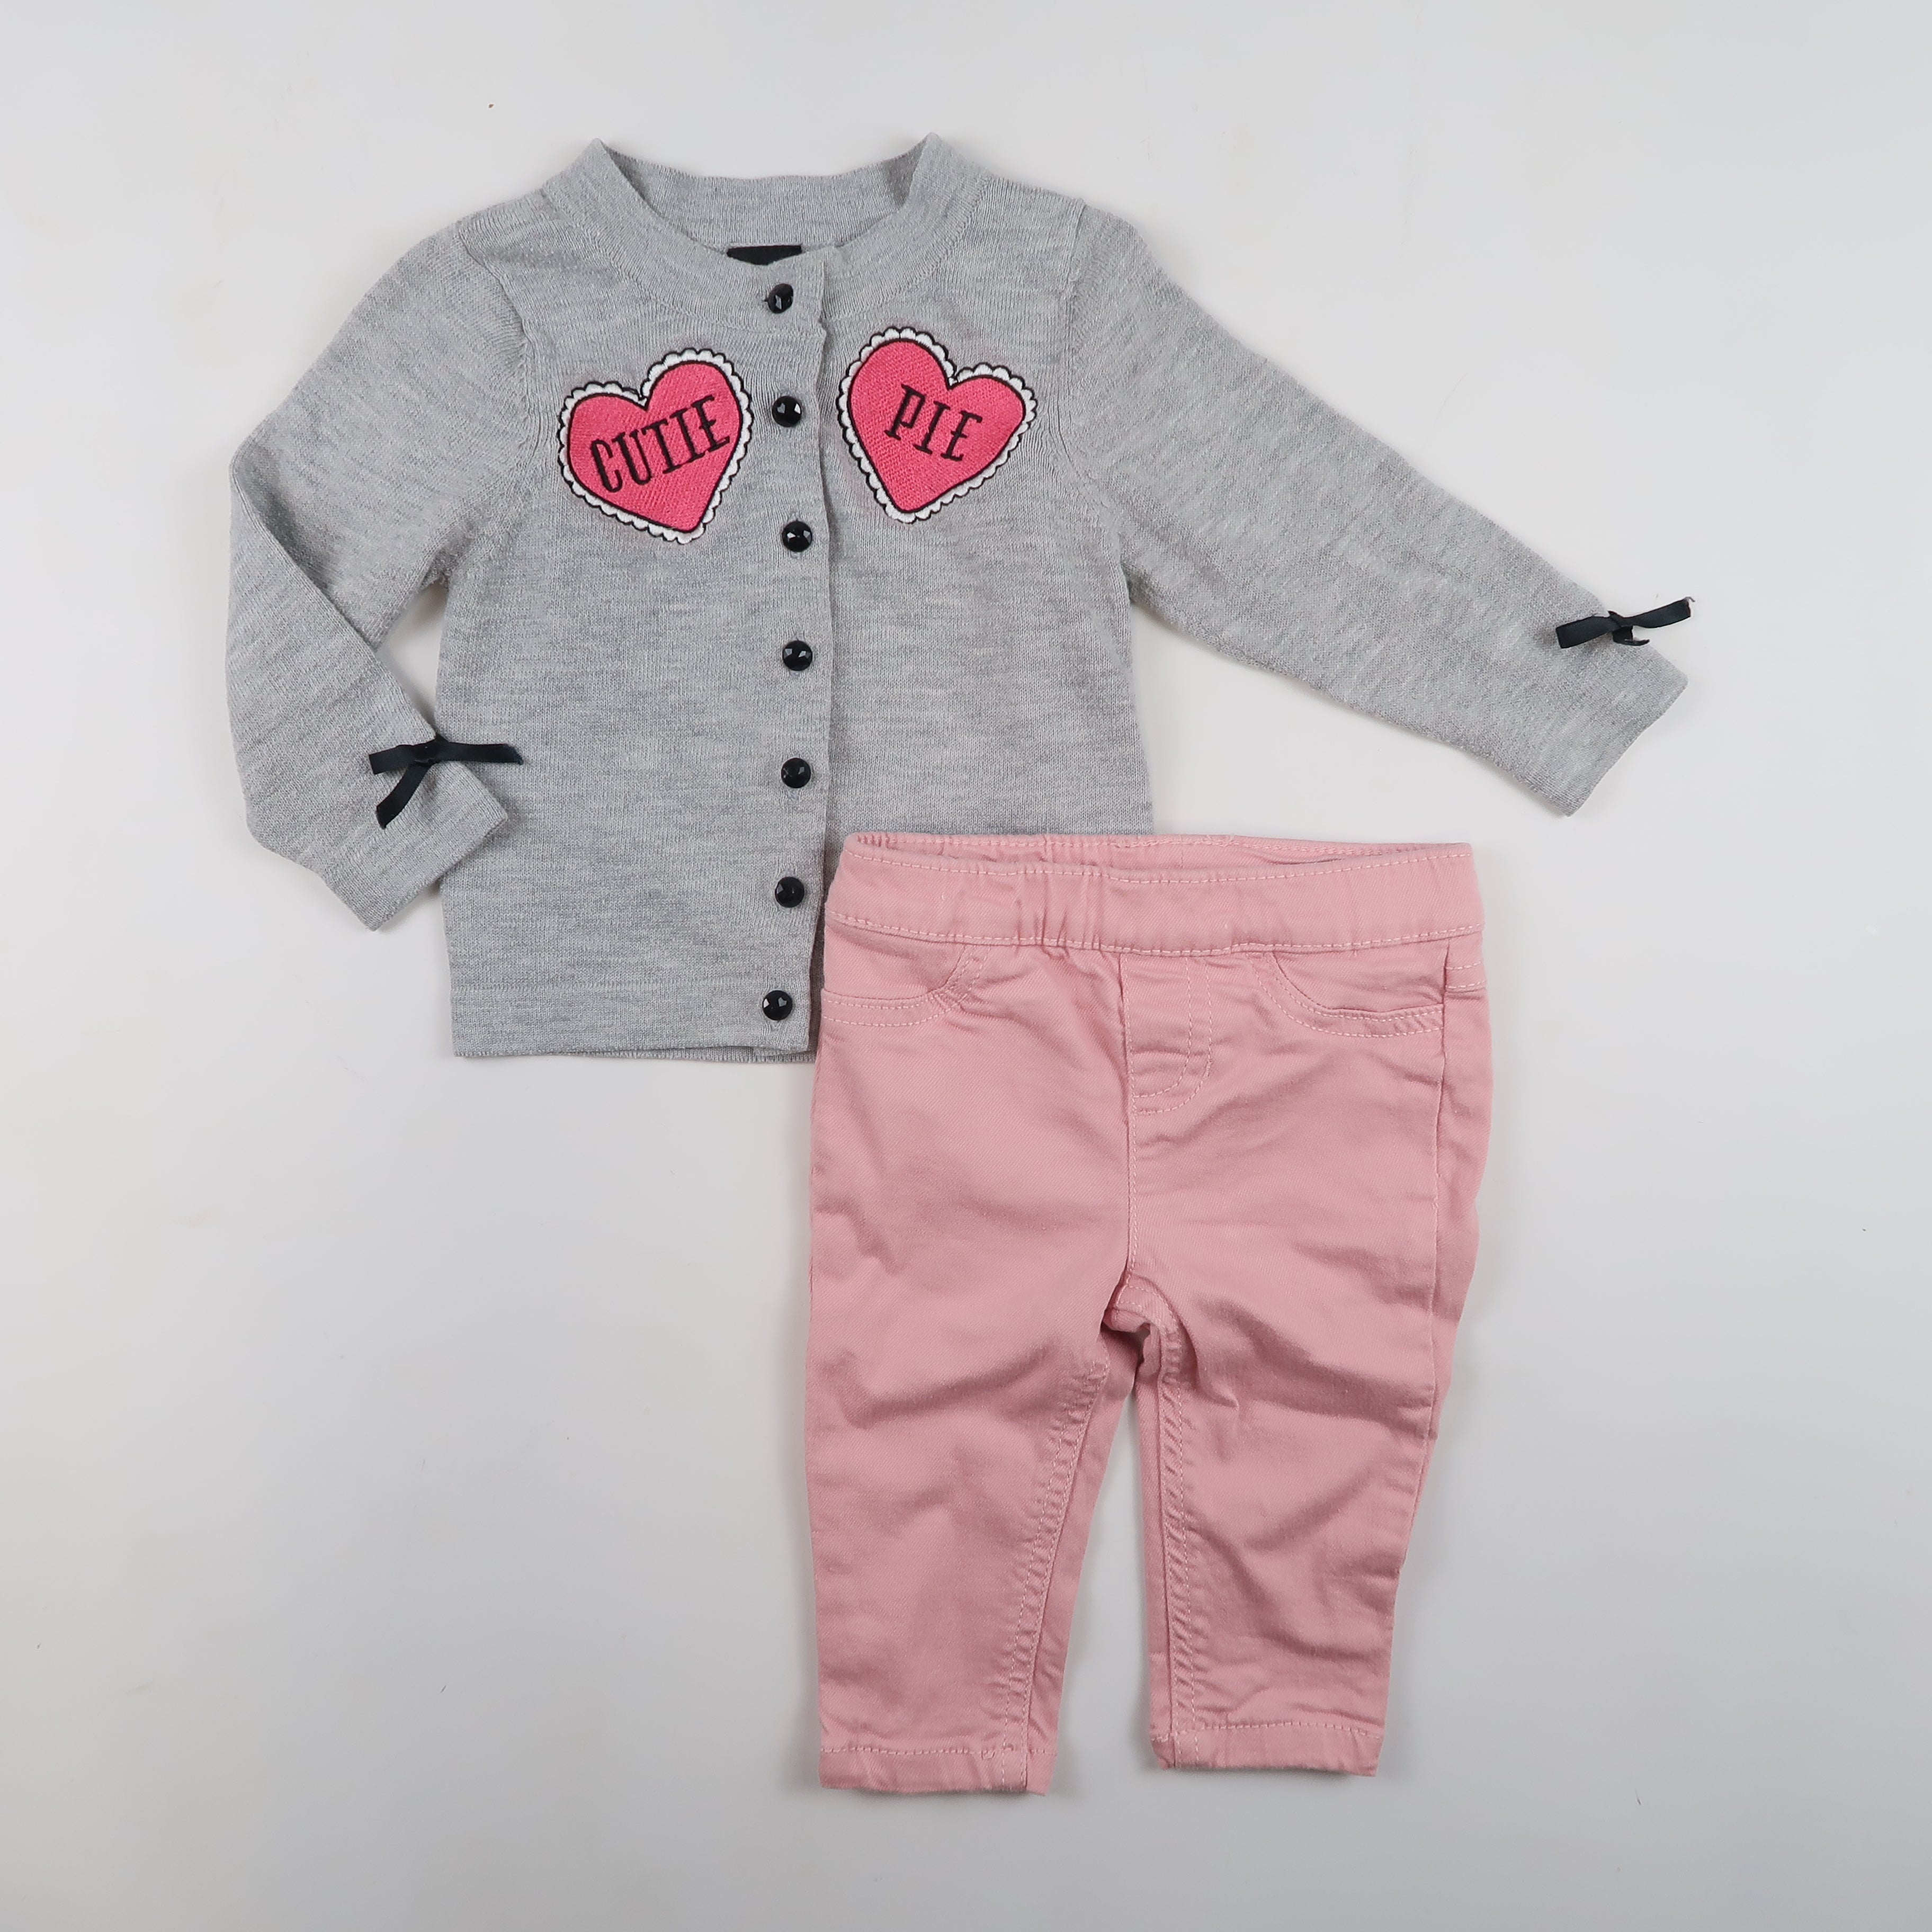 Mixed Brands - Outfit Set (6M)